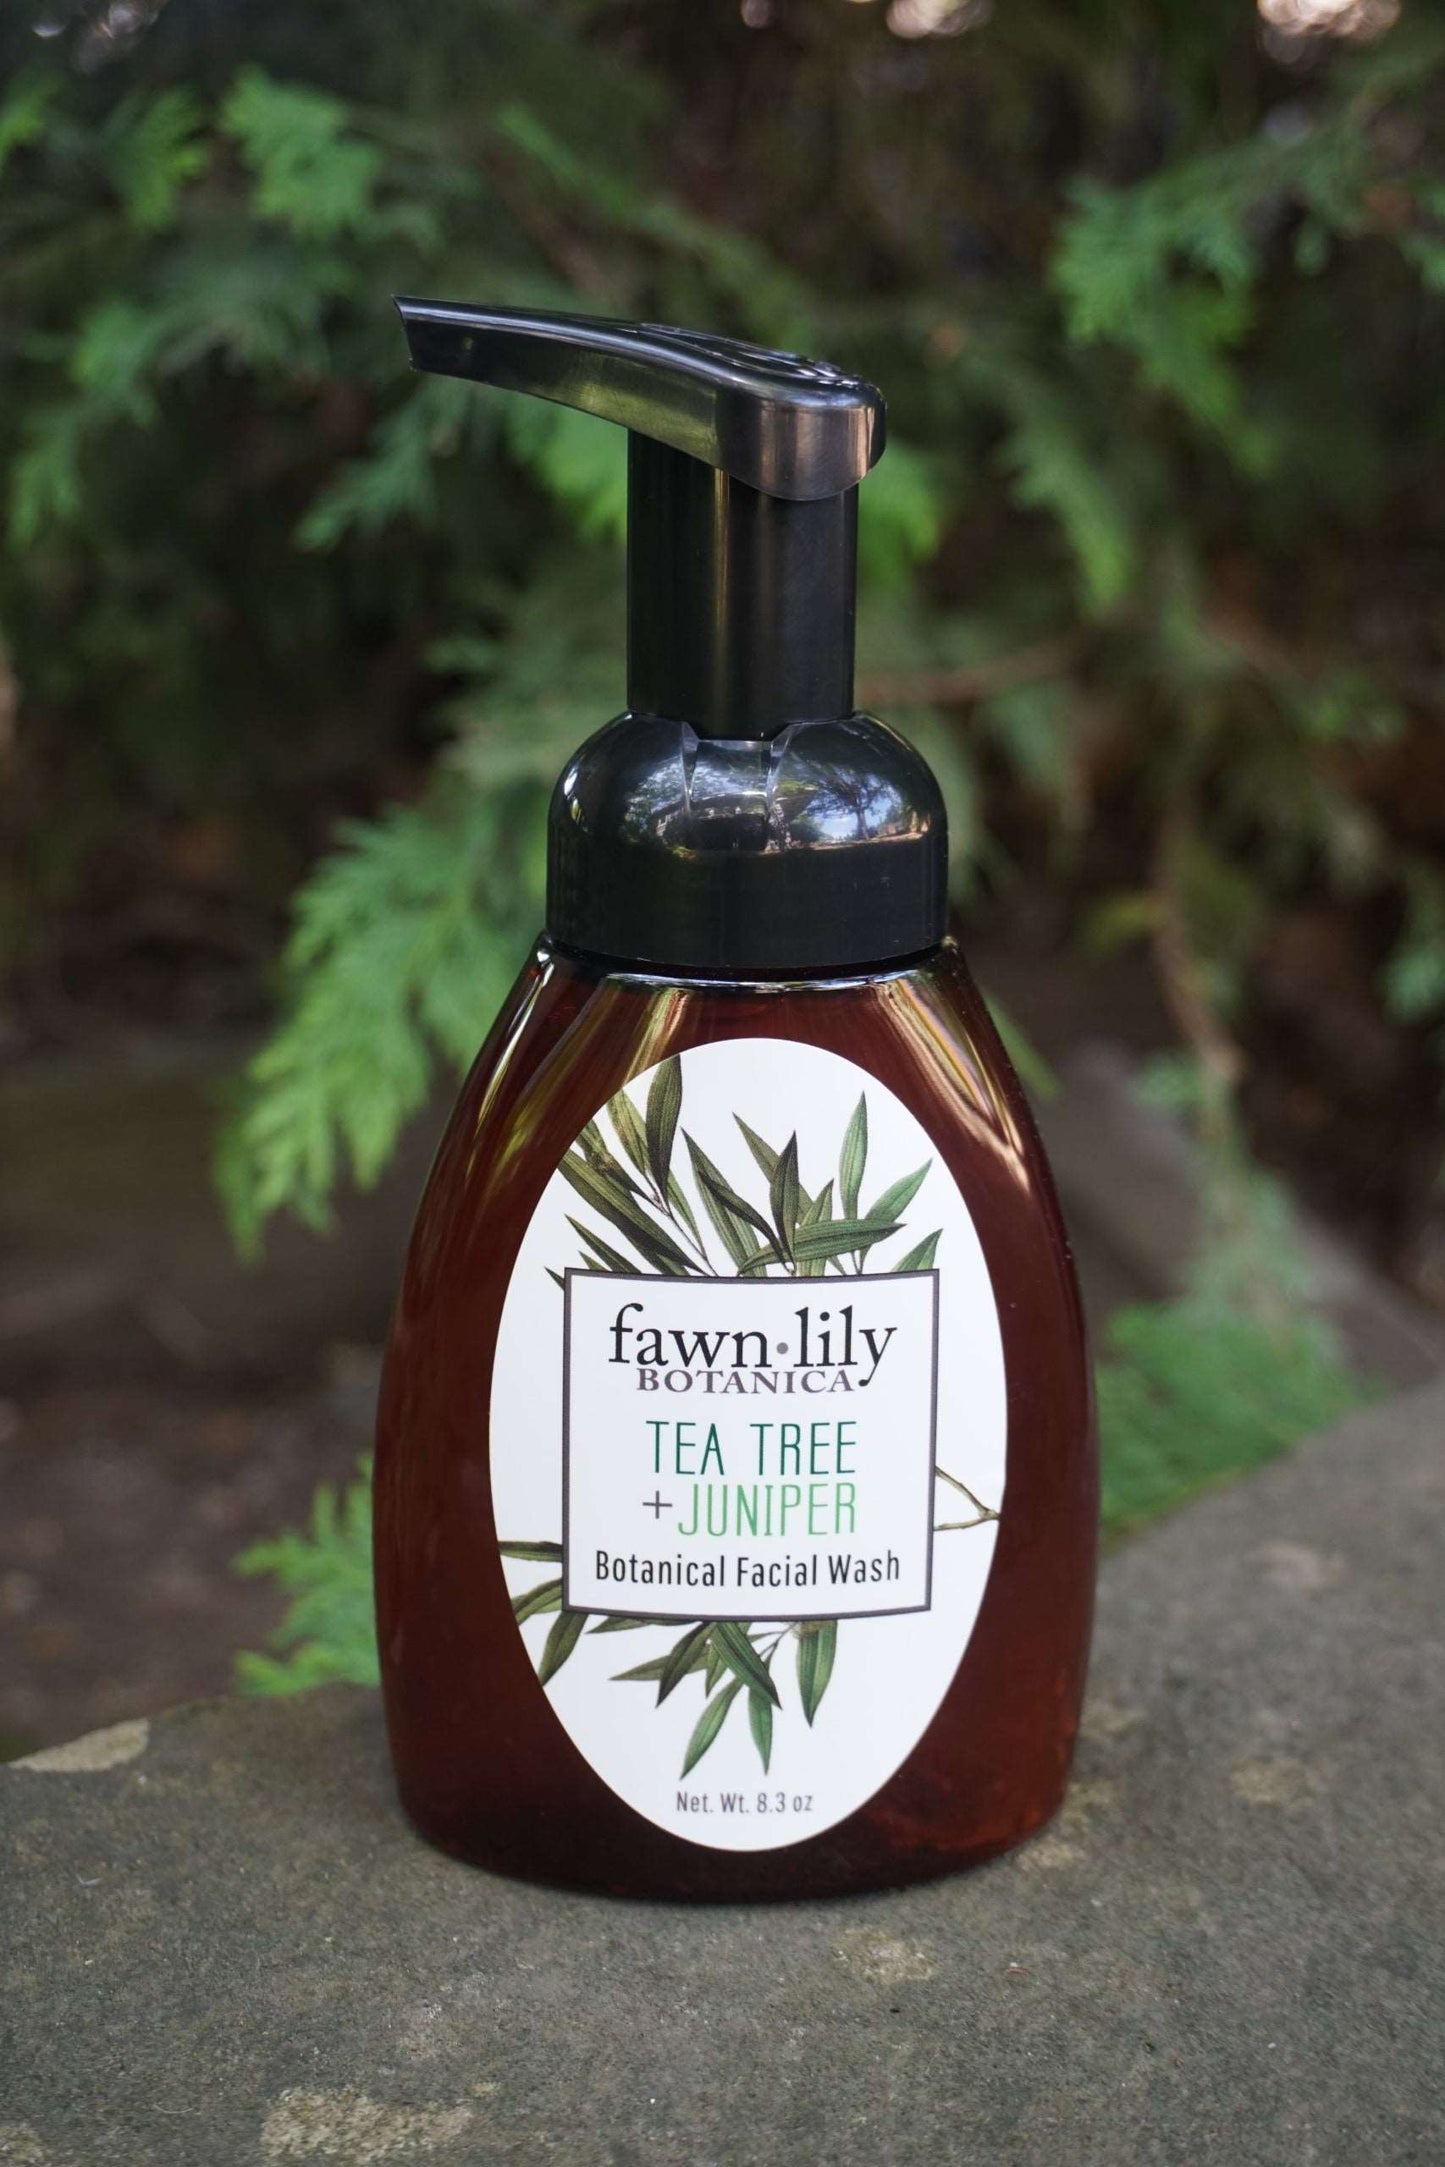 Tea Tree Juniper Facial Wash | Fawn Lily Botanica - Cleanse your skin naturally with Tea Tree Juniper Botanical Facial Wash! Balances, tones, and gently cleanses oily, combination, and acne-prone skin.